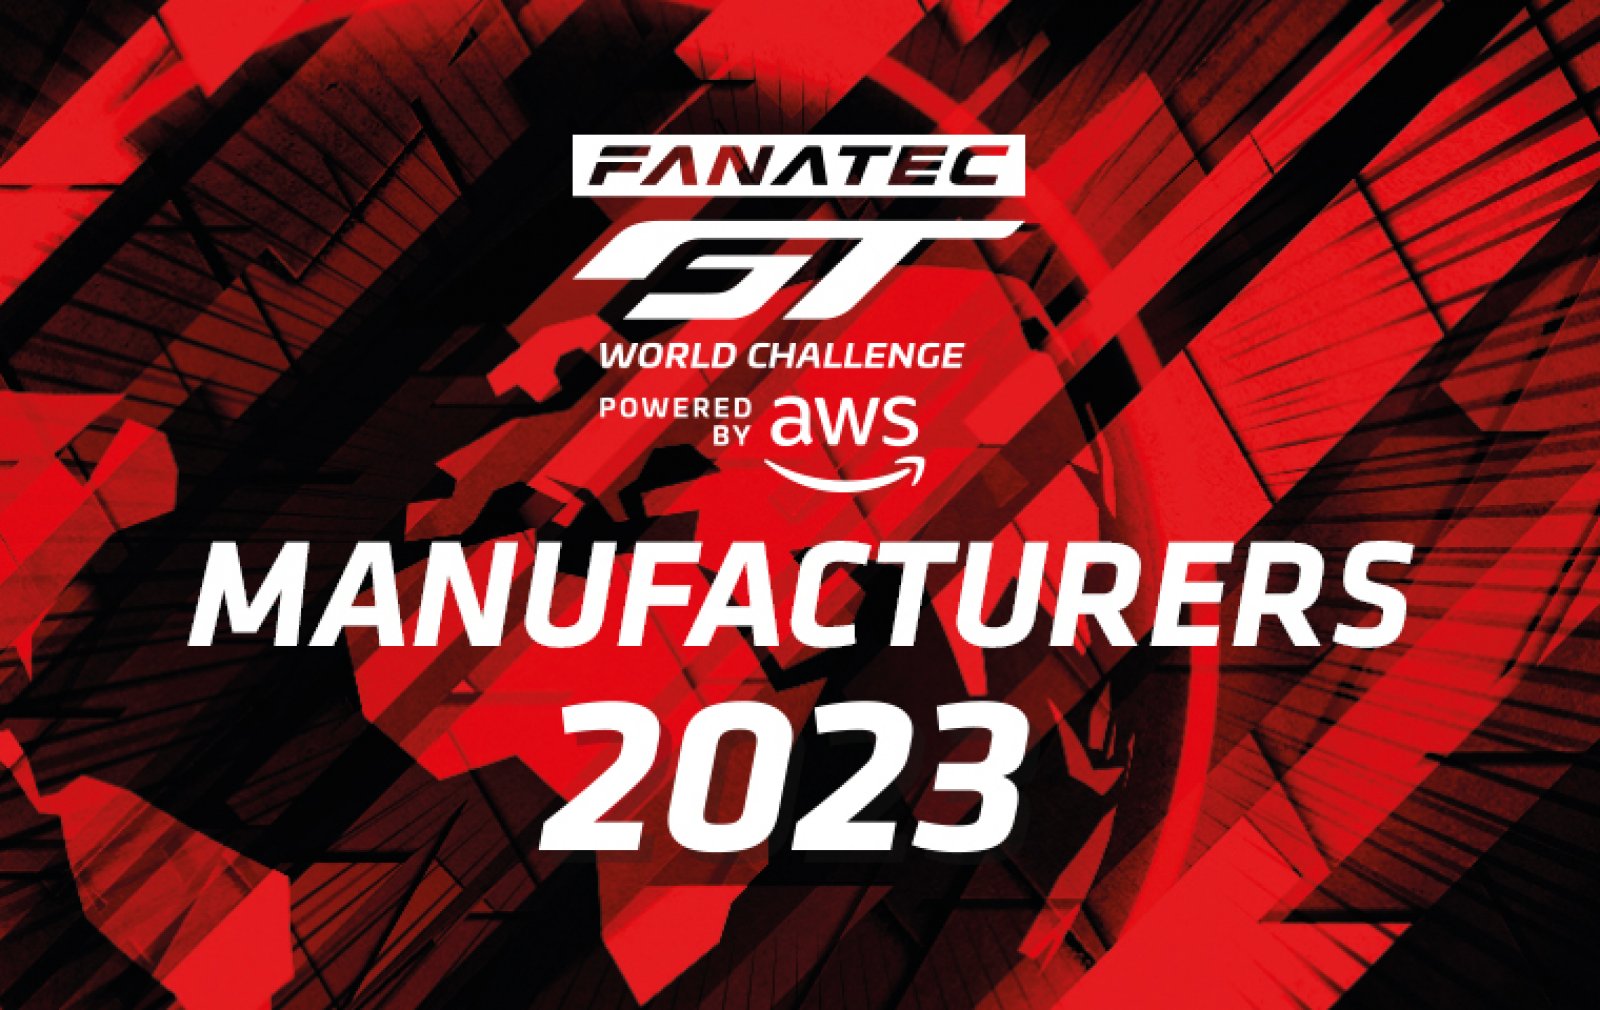 SEVEN ELITE MANUFACTRERS CONTEST 2023 FANATEC GT WORLD CHALLENGE POWERED BY AWS 